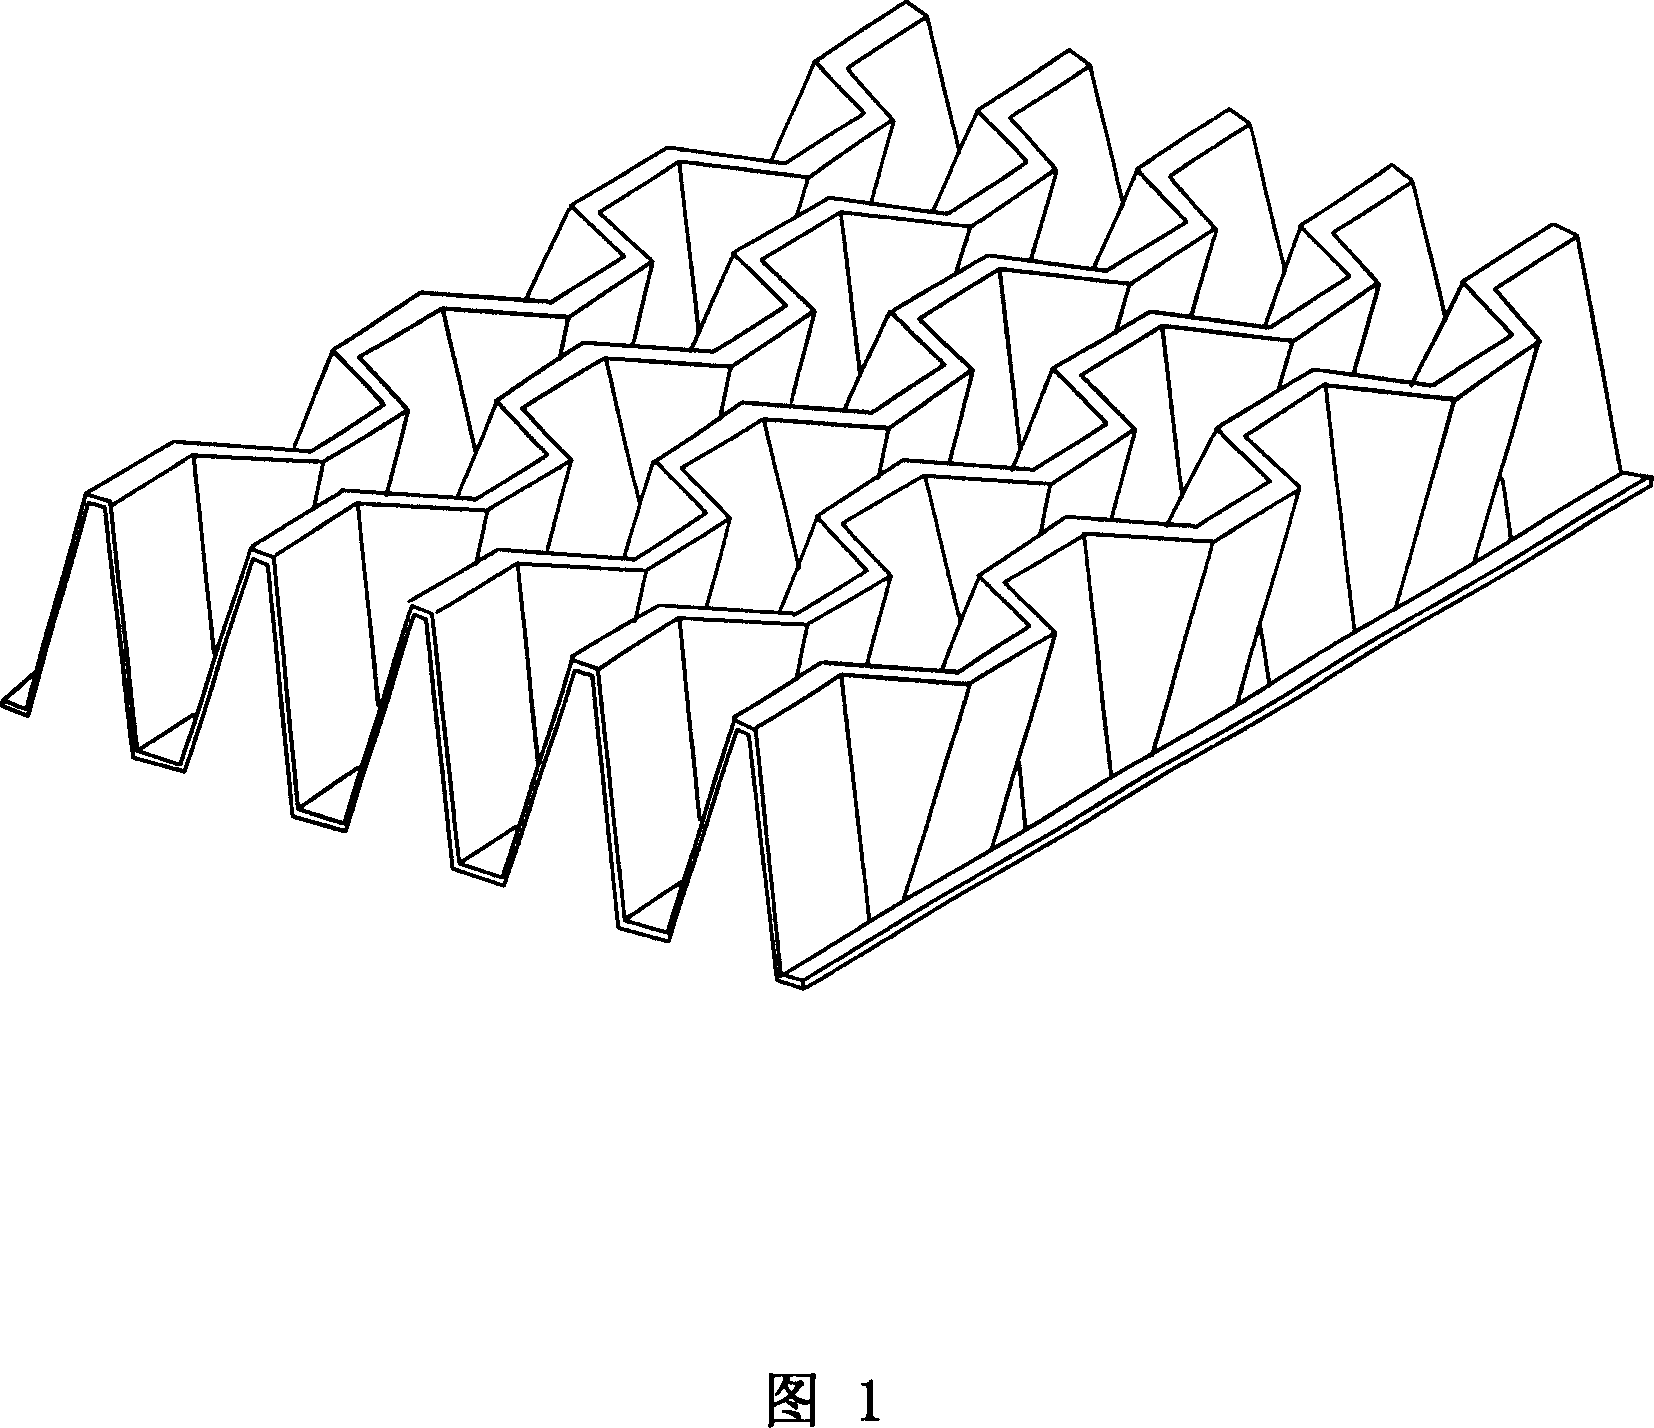 Chaos fin and plate-fin heat exchanger comprising the same